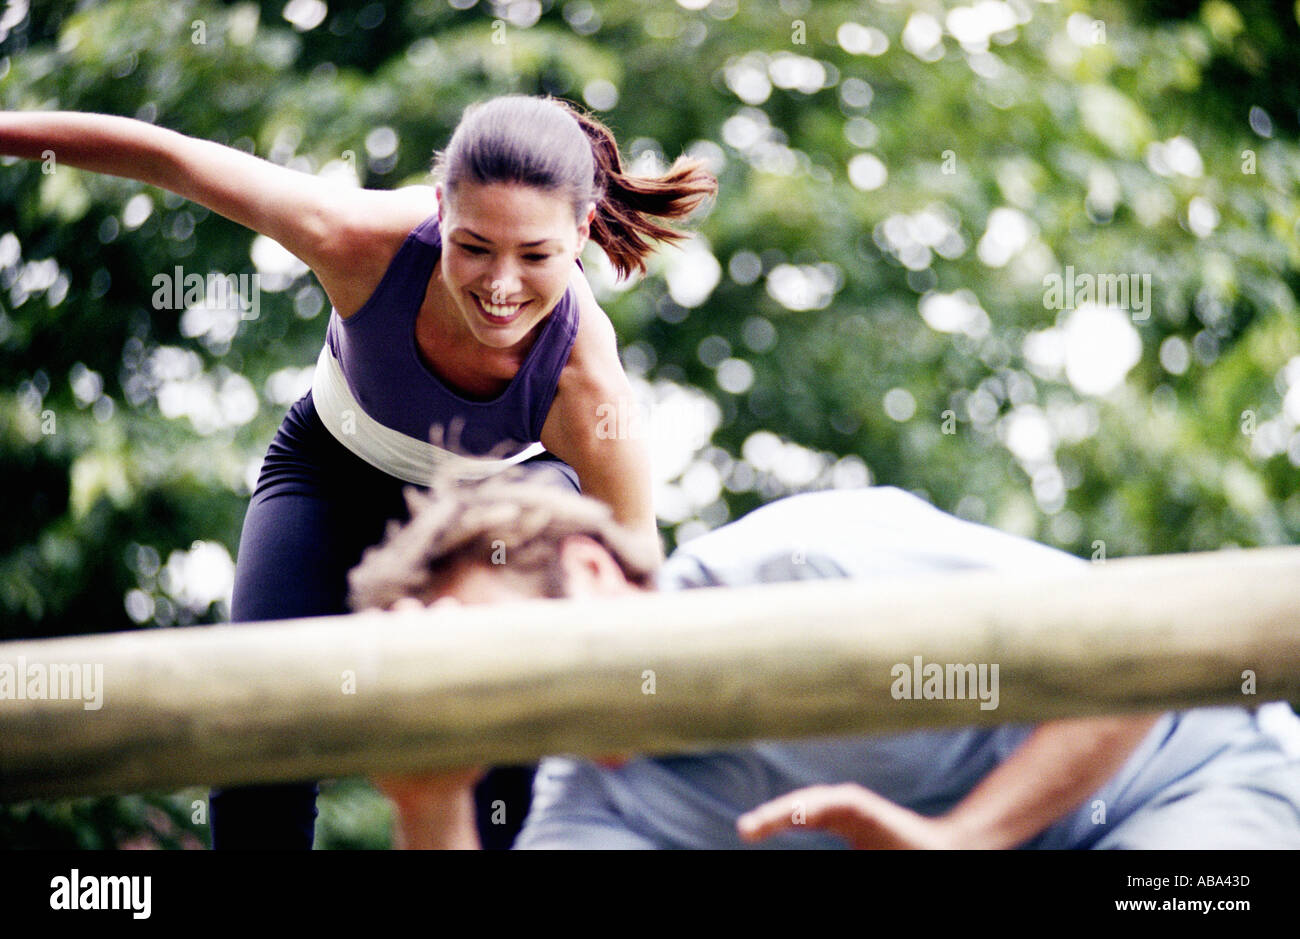 Couple on obstacle course Stock Photo